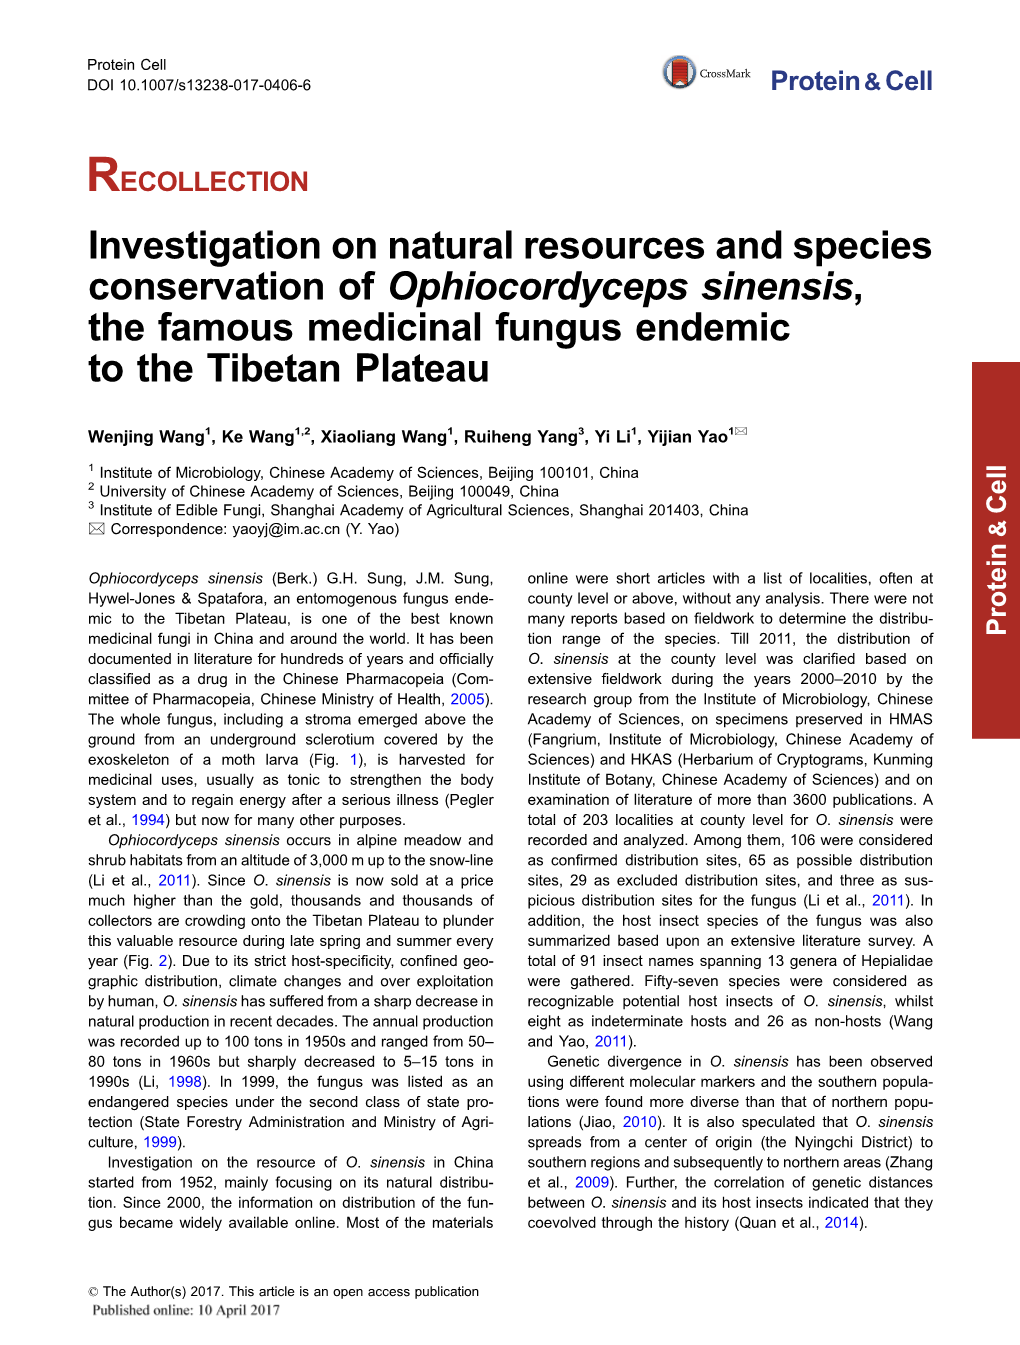 Investigation on Natural Resources and Species Conservation of Ophiocordyceps Sinensis, the Famous Medicinal Fungus Endemic to the Tibetan Plateau